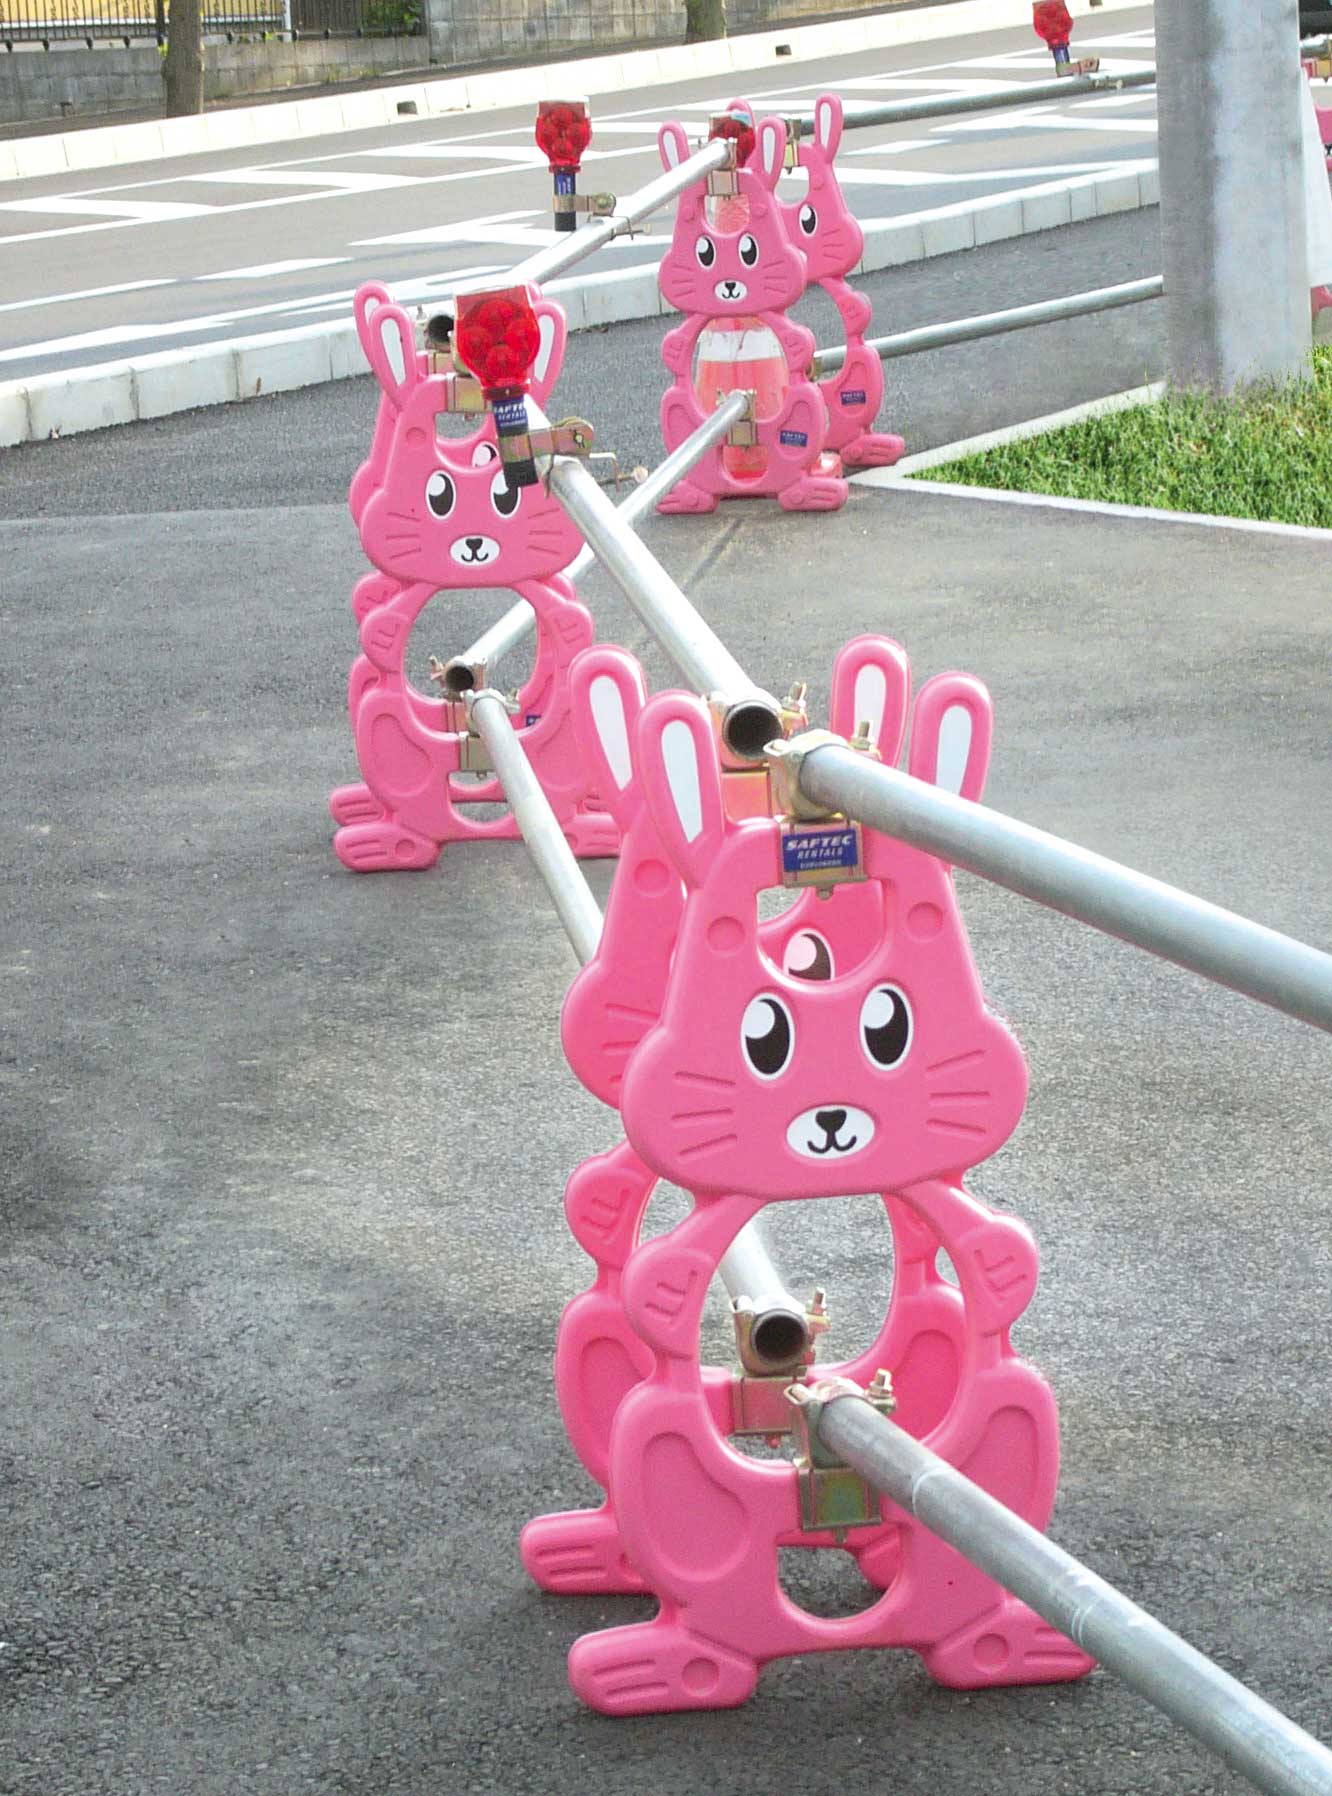 Even barriers can look “cute”.